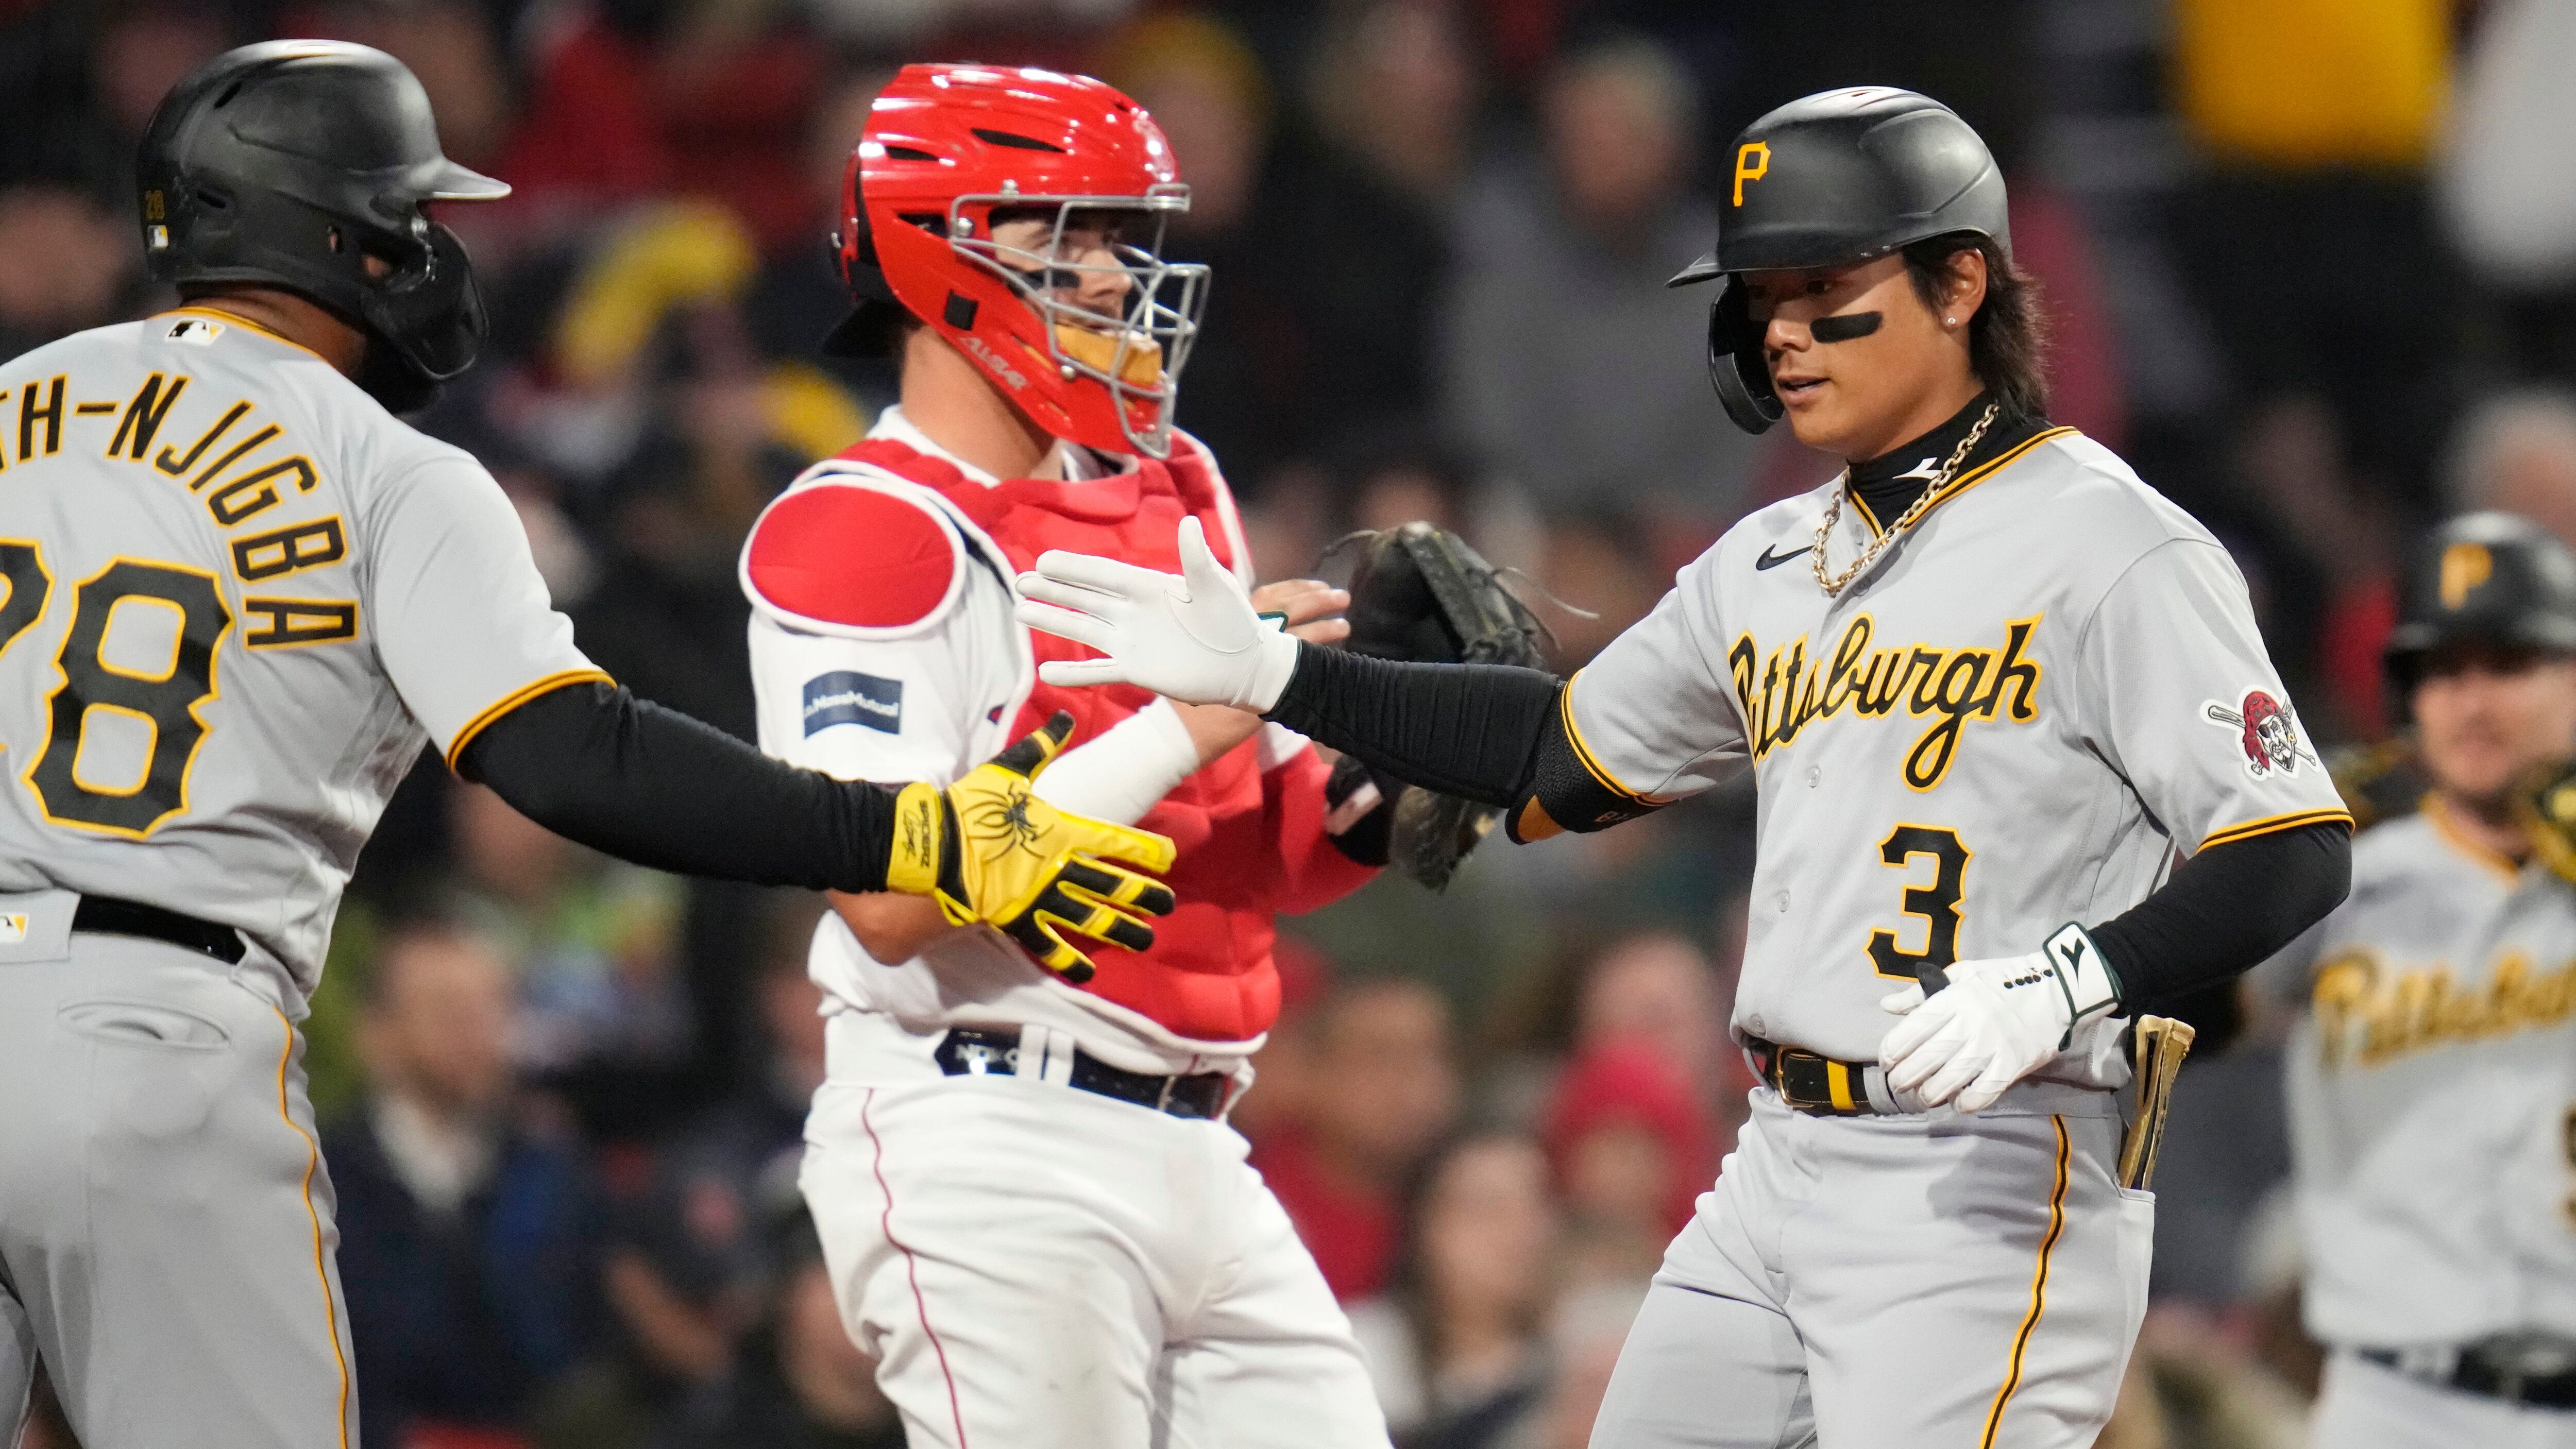 pittsburgh pirates red uniforms